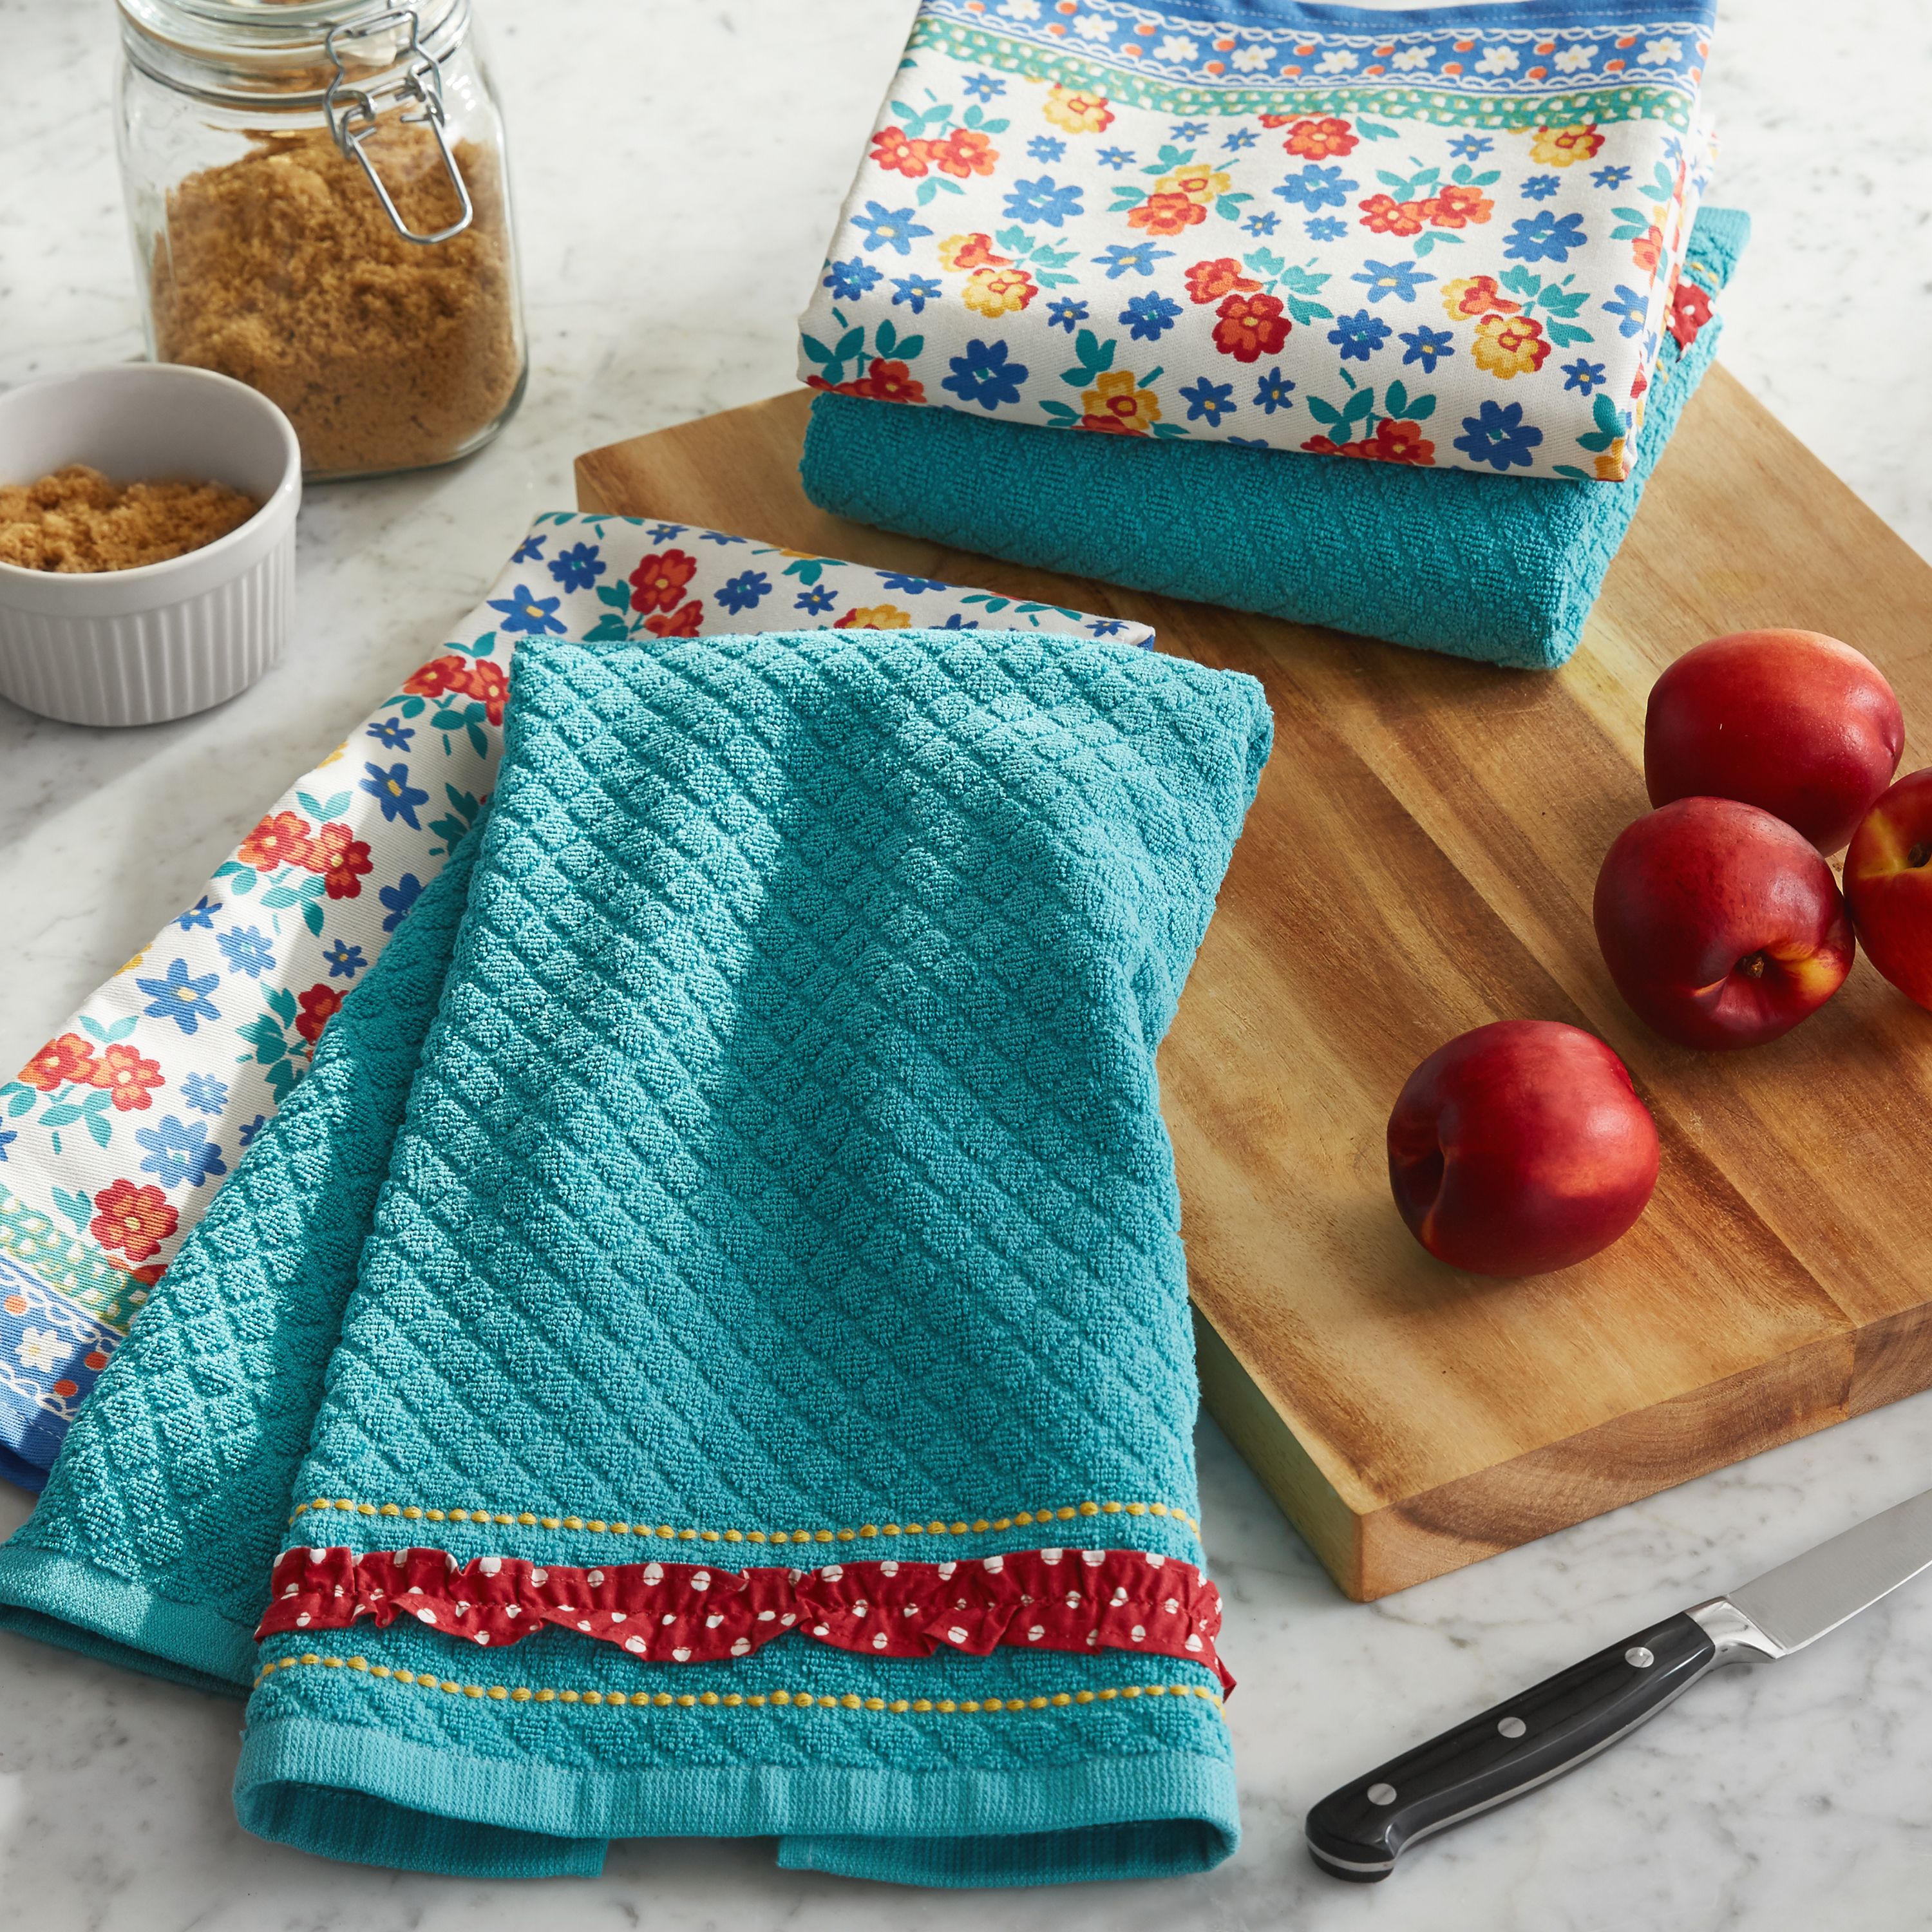 The Pioneer Woman Floral Kitchen Towel Set, Multicolor, 4 Piece - image 1 of 4